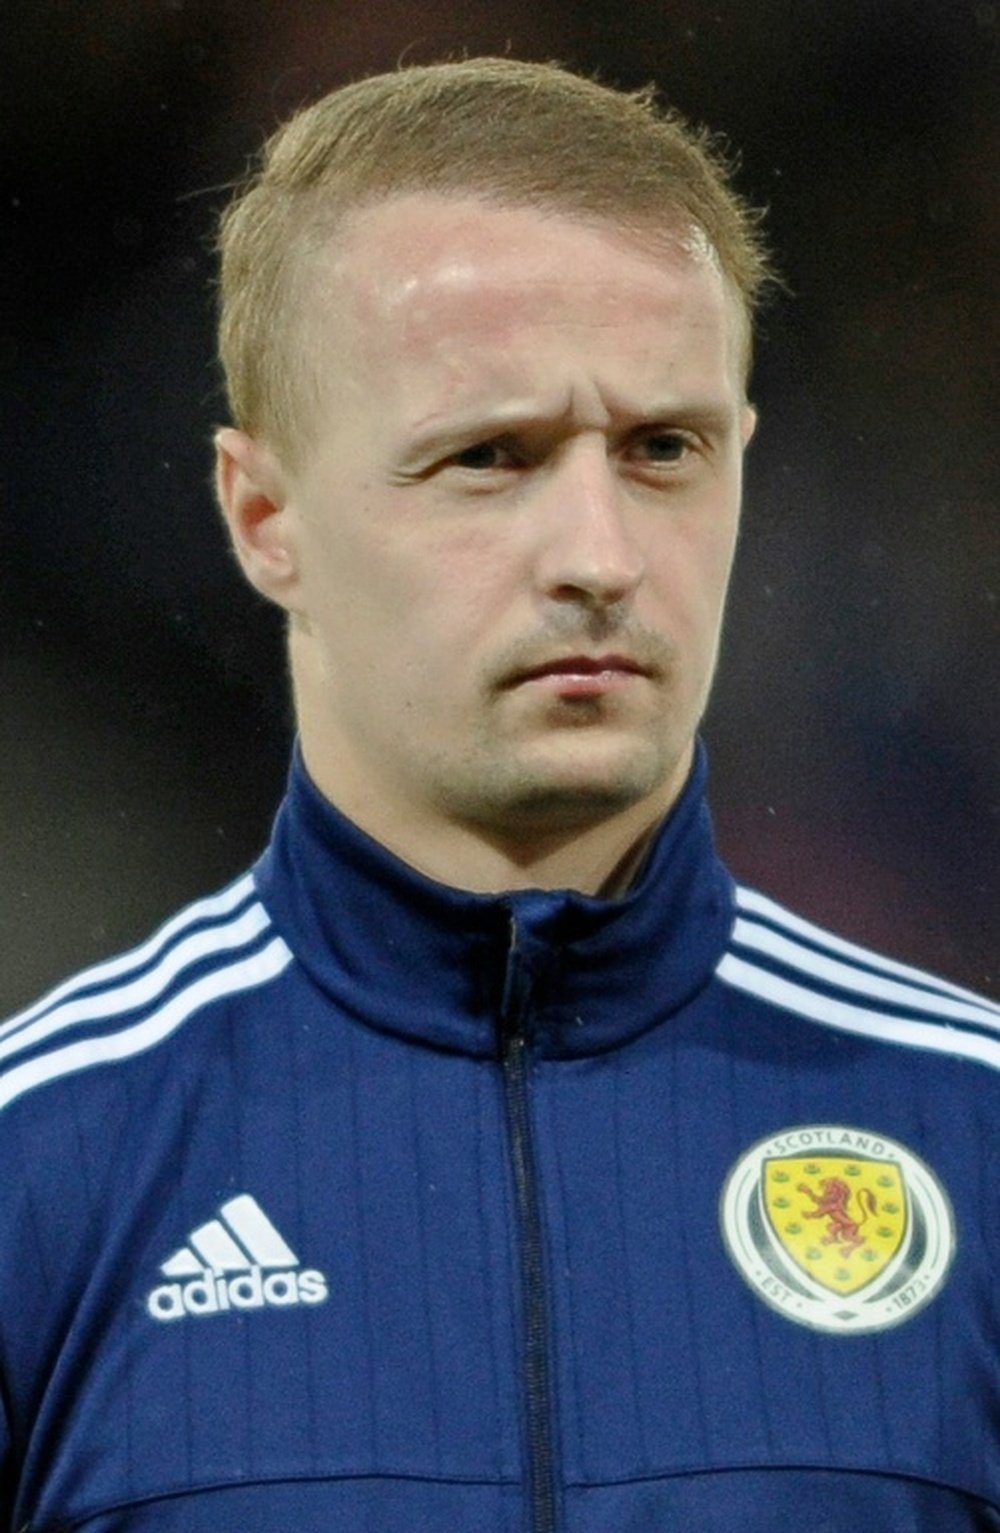 Griffiths has had to withdraw from the Scotland squad for Nations League games this month. AFP